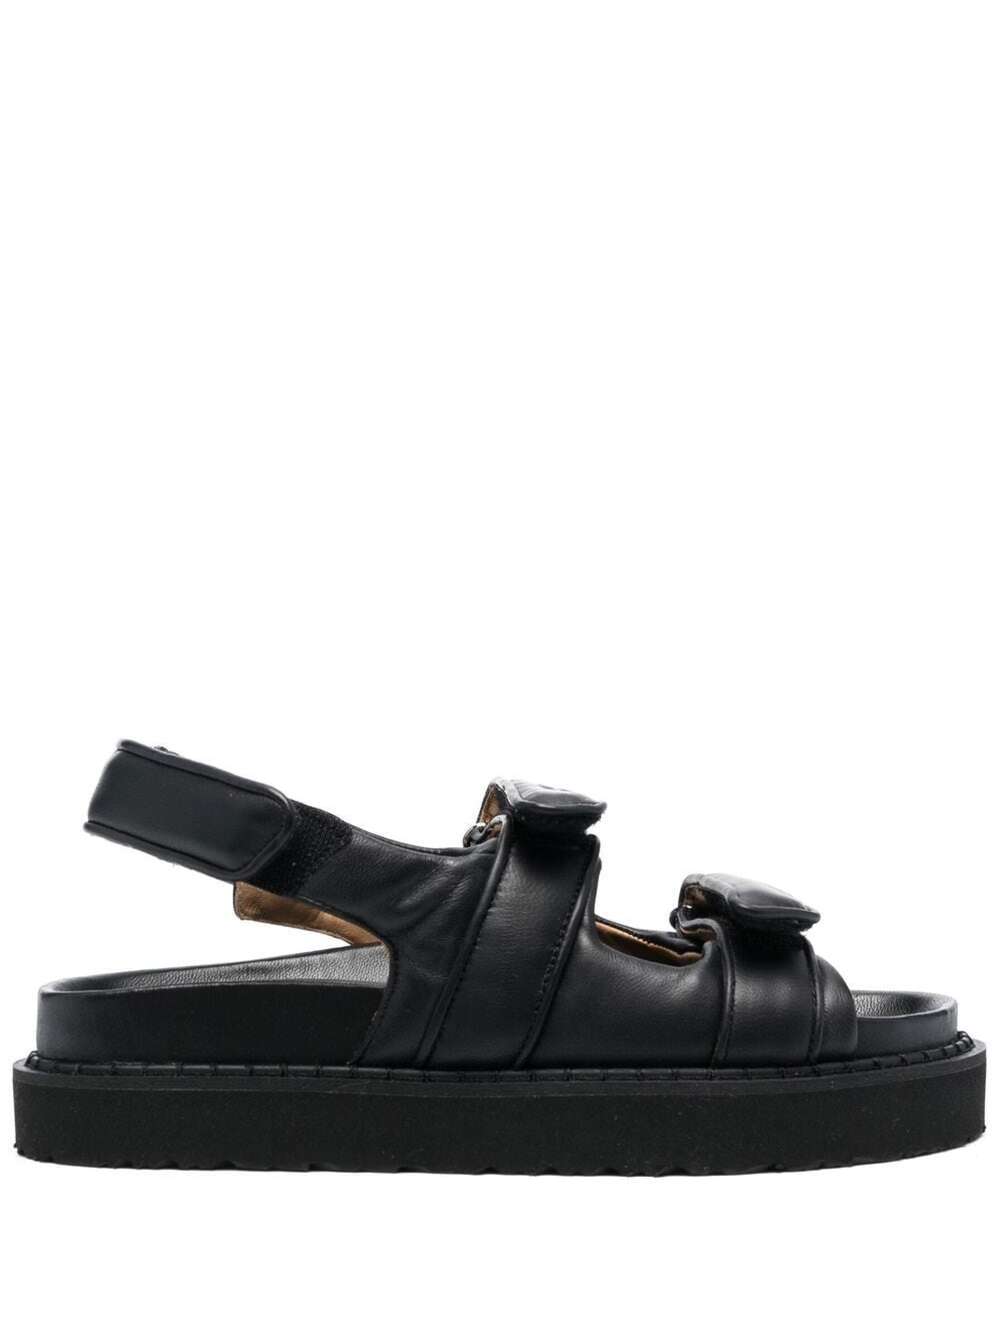 ISABEL MARANT BLACK TOUCH-STRAP PLATFORM SANDALS IN LEATHER WOMAN